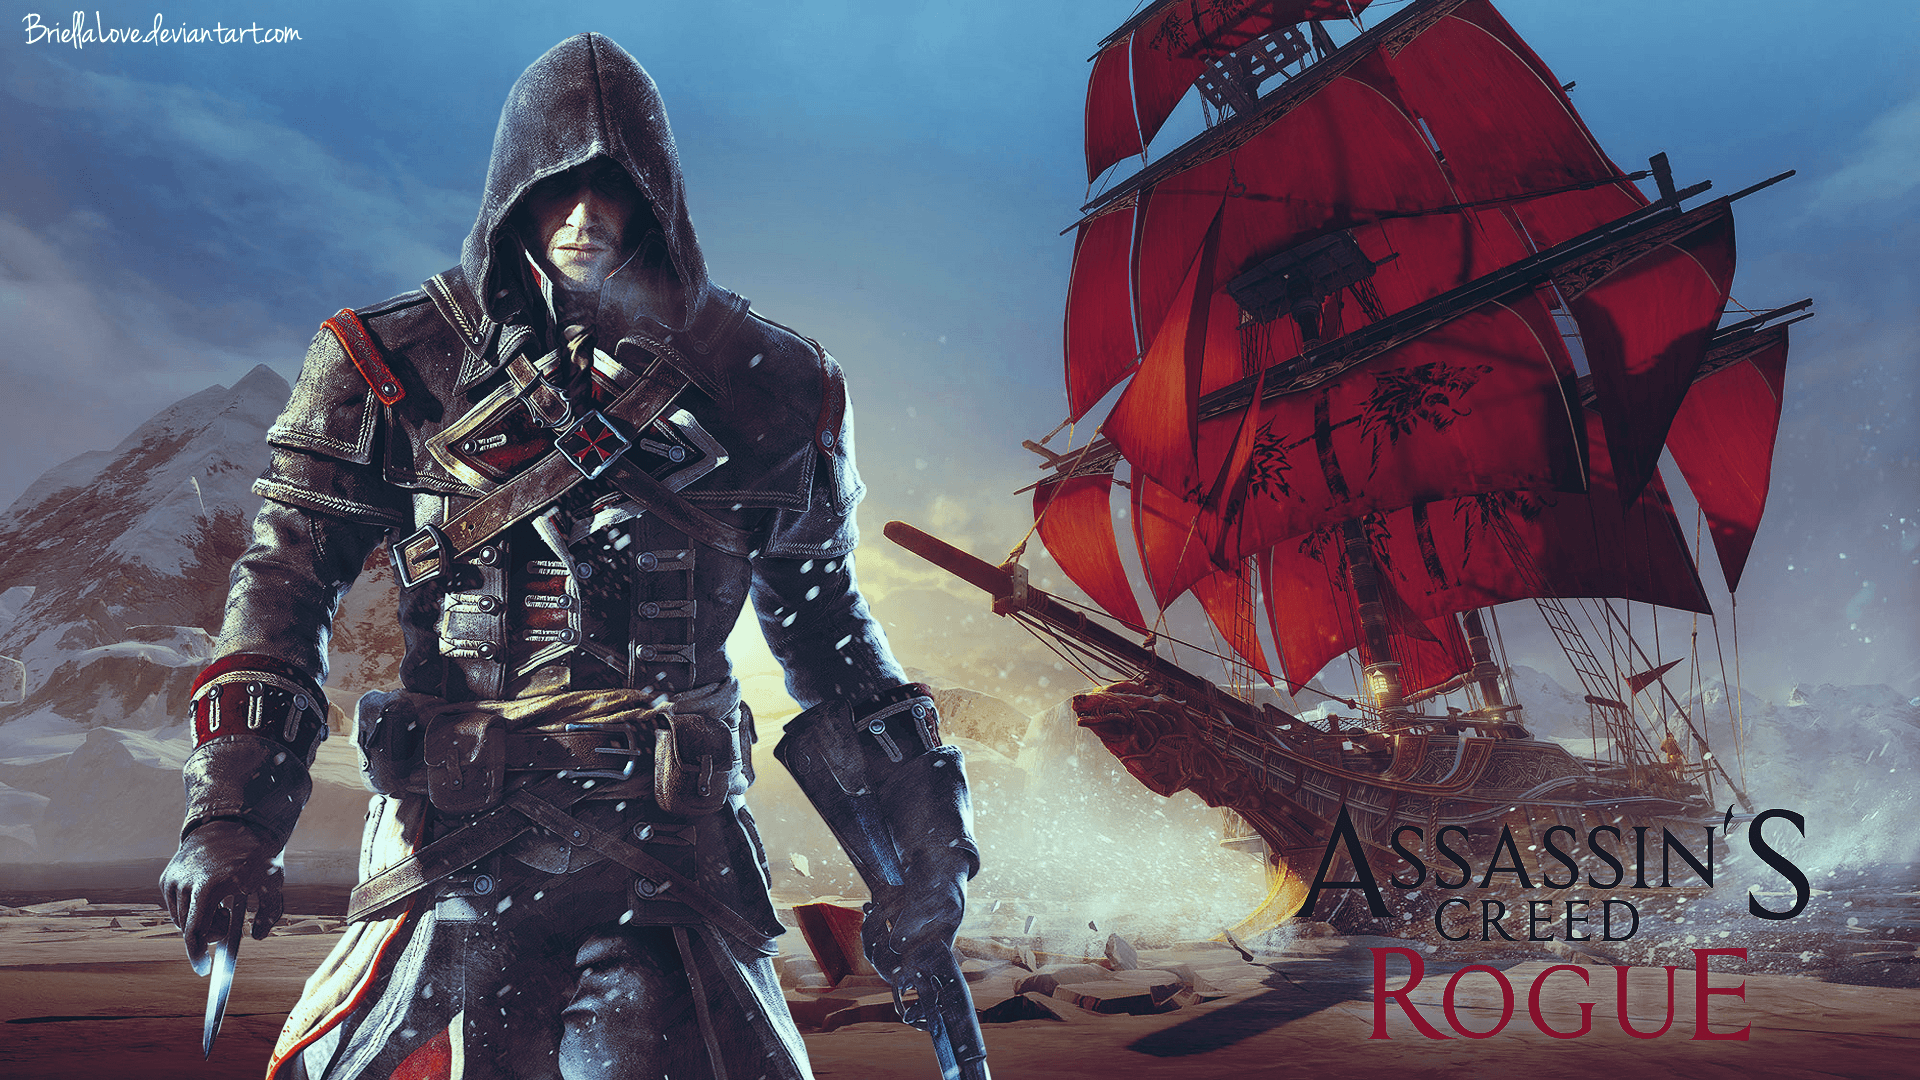 Assassin's Creed Rogue Wallpapers 1080p.